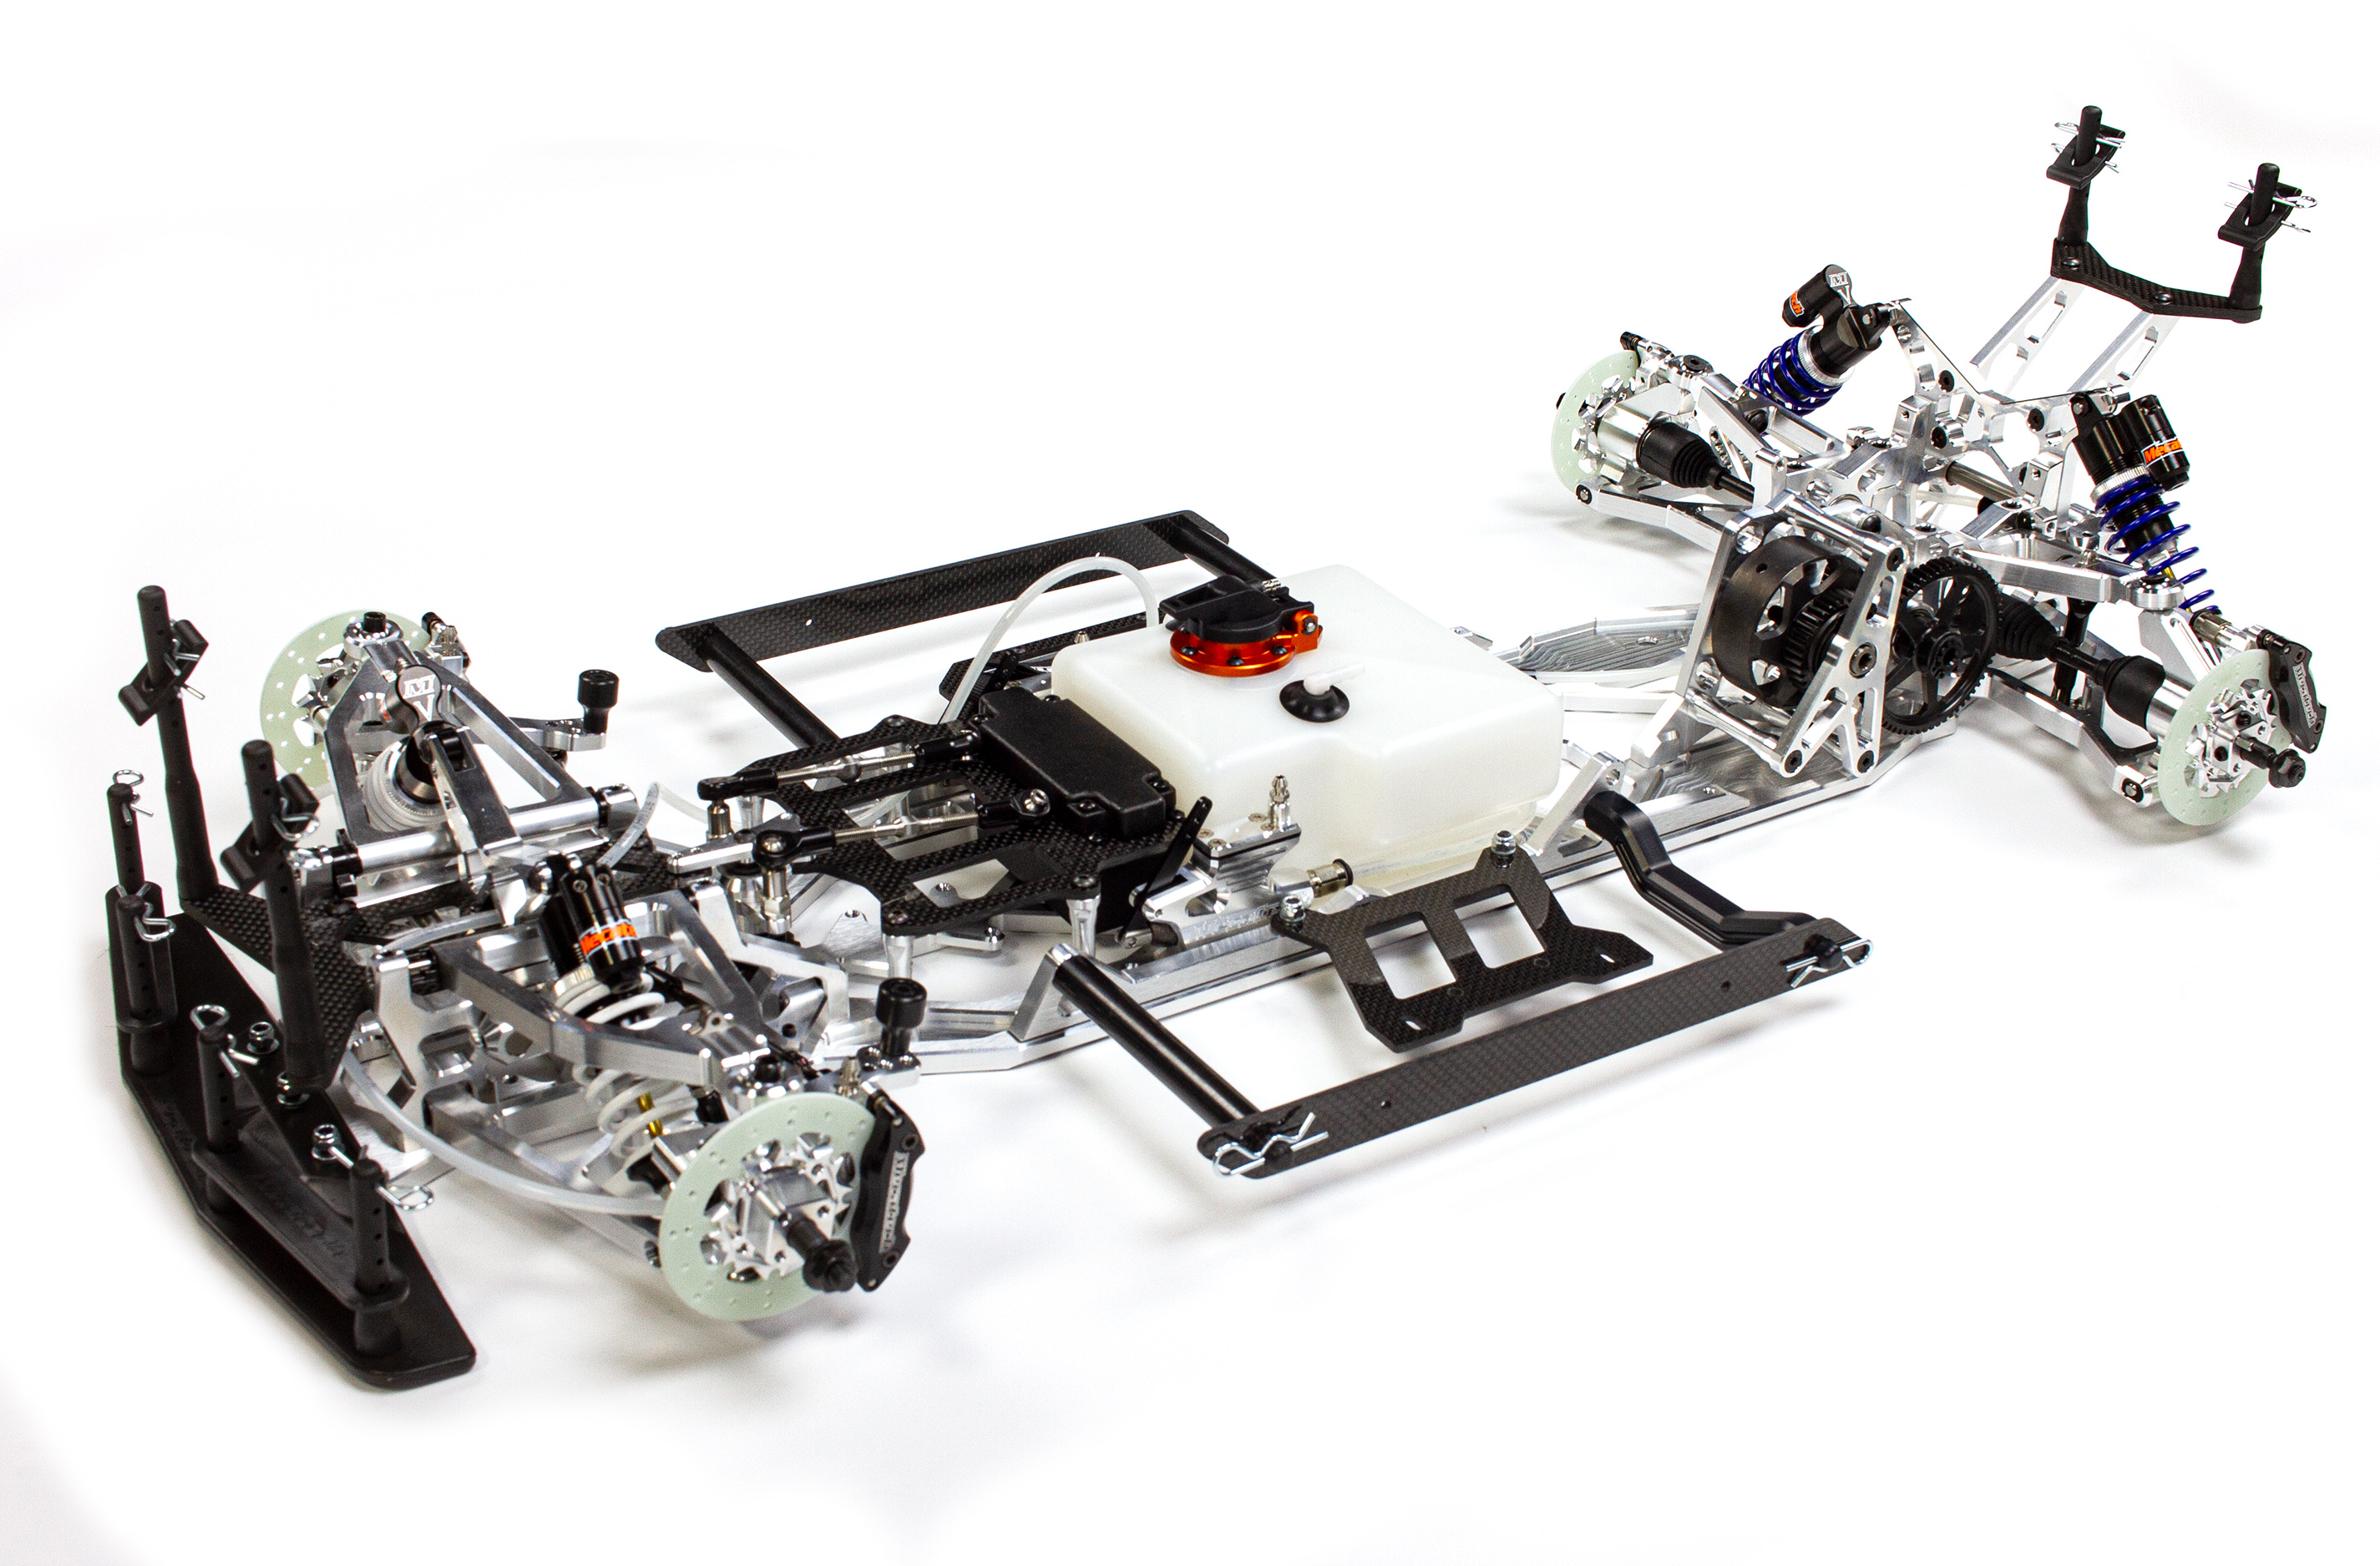 Mecatech FW01 Touring car, wheelbase 510 mm, Chassis Kit -- Europe- and world champion